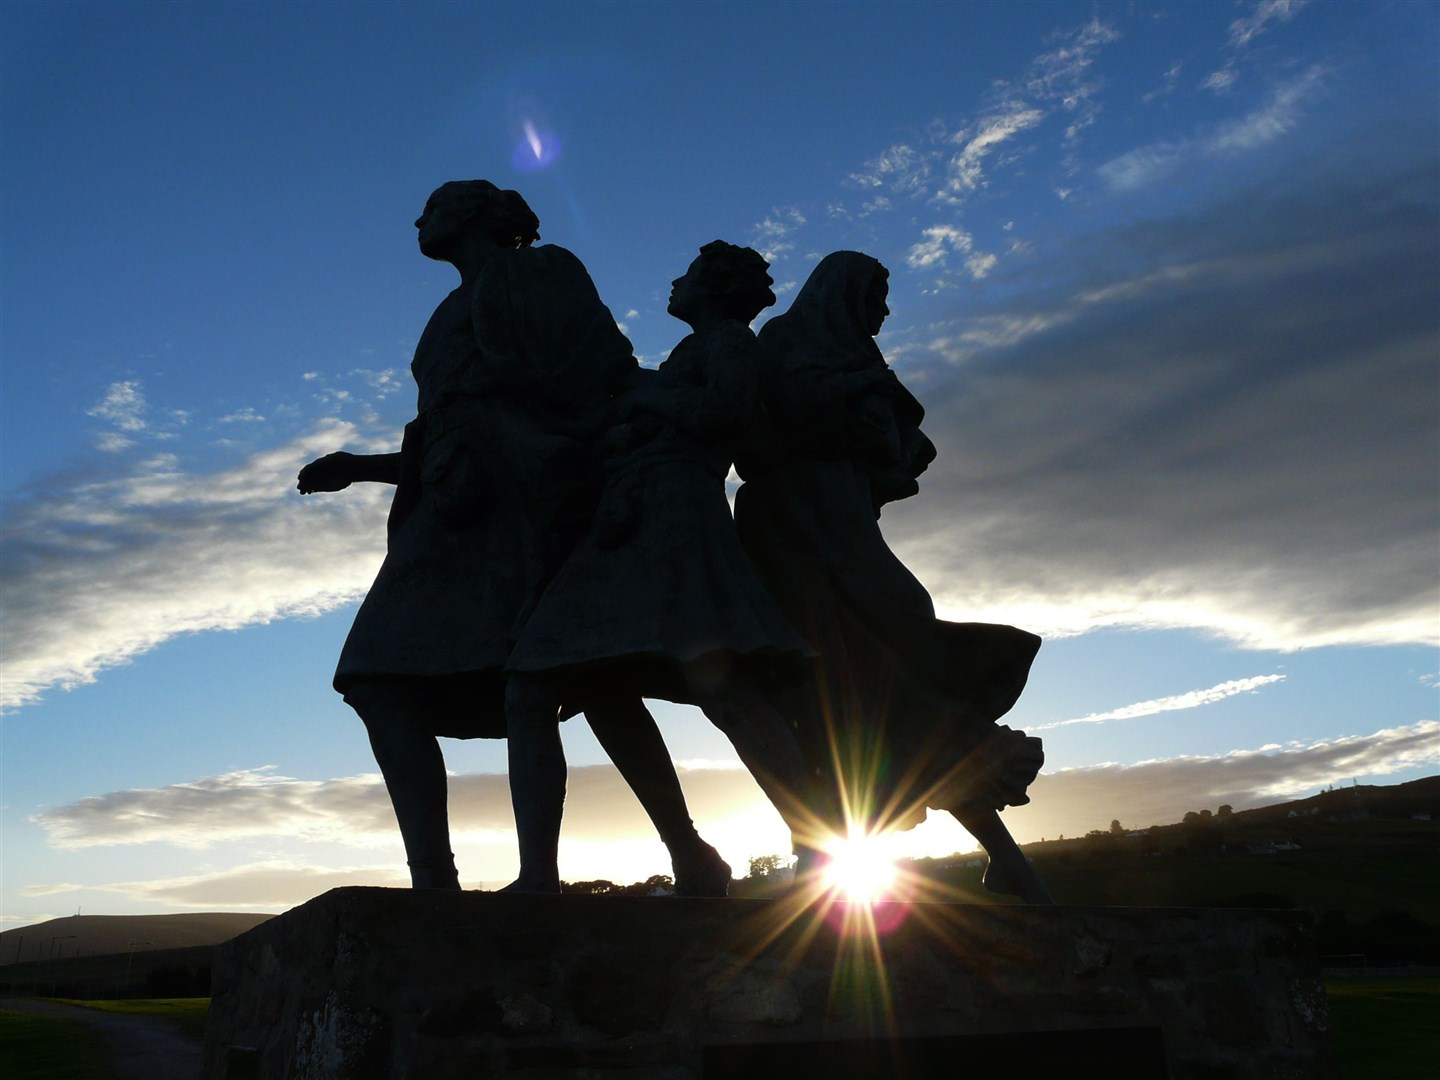 The Emigrants statue at Helmsdale, commemorating those who left the Highlands and acting as a reminder of the Clearances. It is on the North Coast 500 tourist route. Picture: Alan Hendry